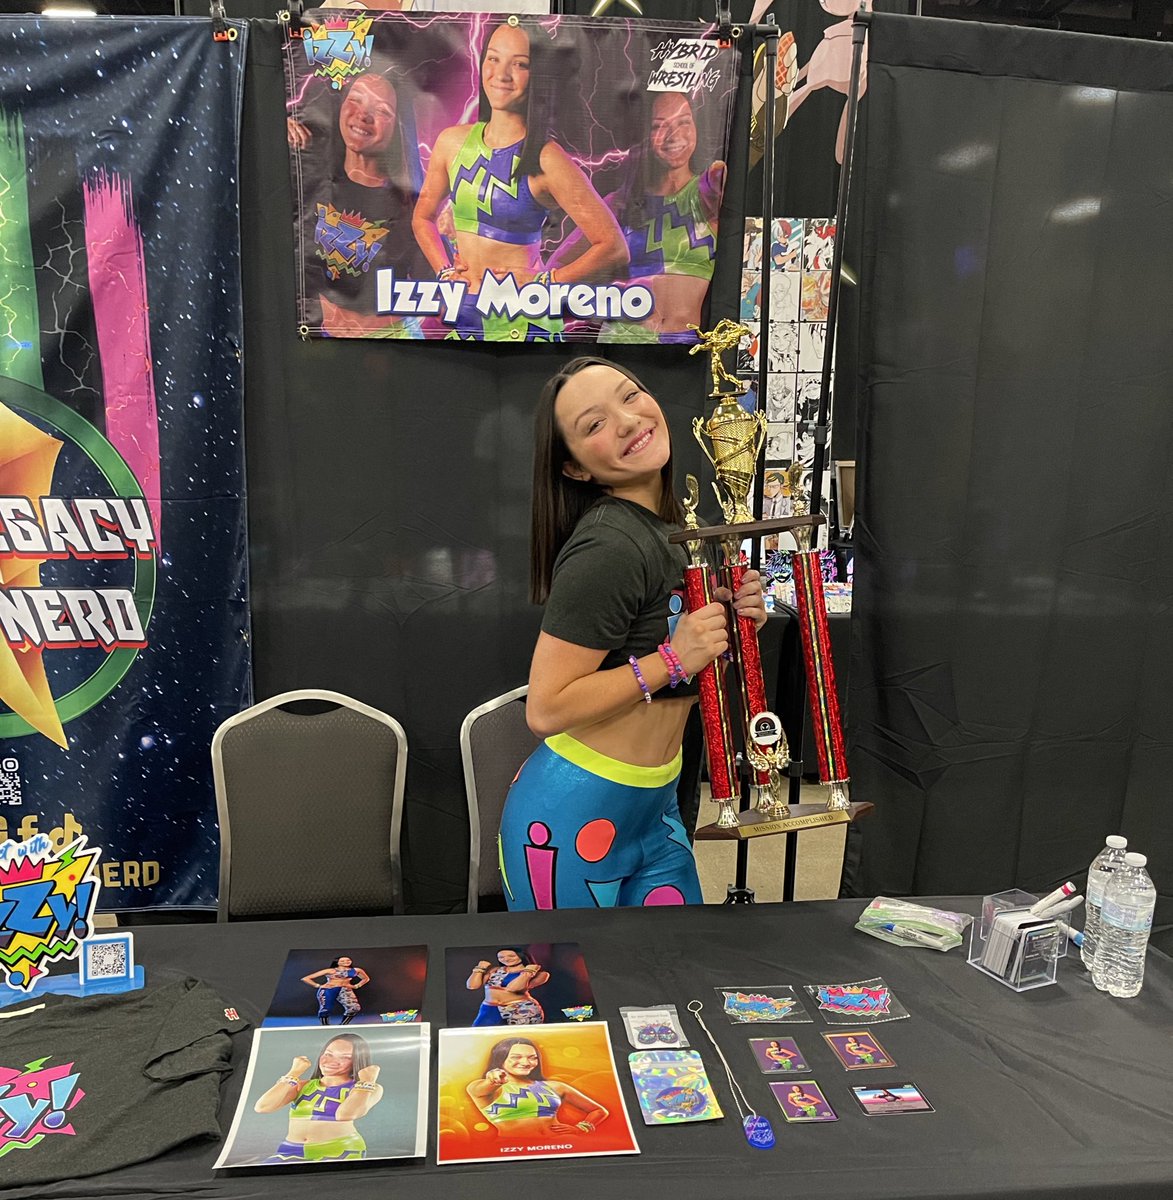 Come by Nostalgia Con TODAY!!! You can hang out with myself and my BFF the @MissionProWres Cup! Here are all my appearance times: 🖊️: 10 am-11 am 💪 (Wrestling): 11:45 am 🖊️: 12:00 pm- 5 pm See yah soon! 💜💚